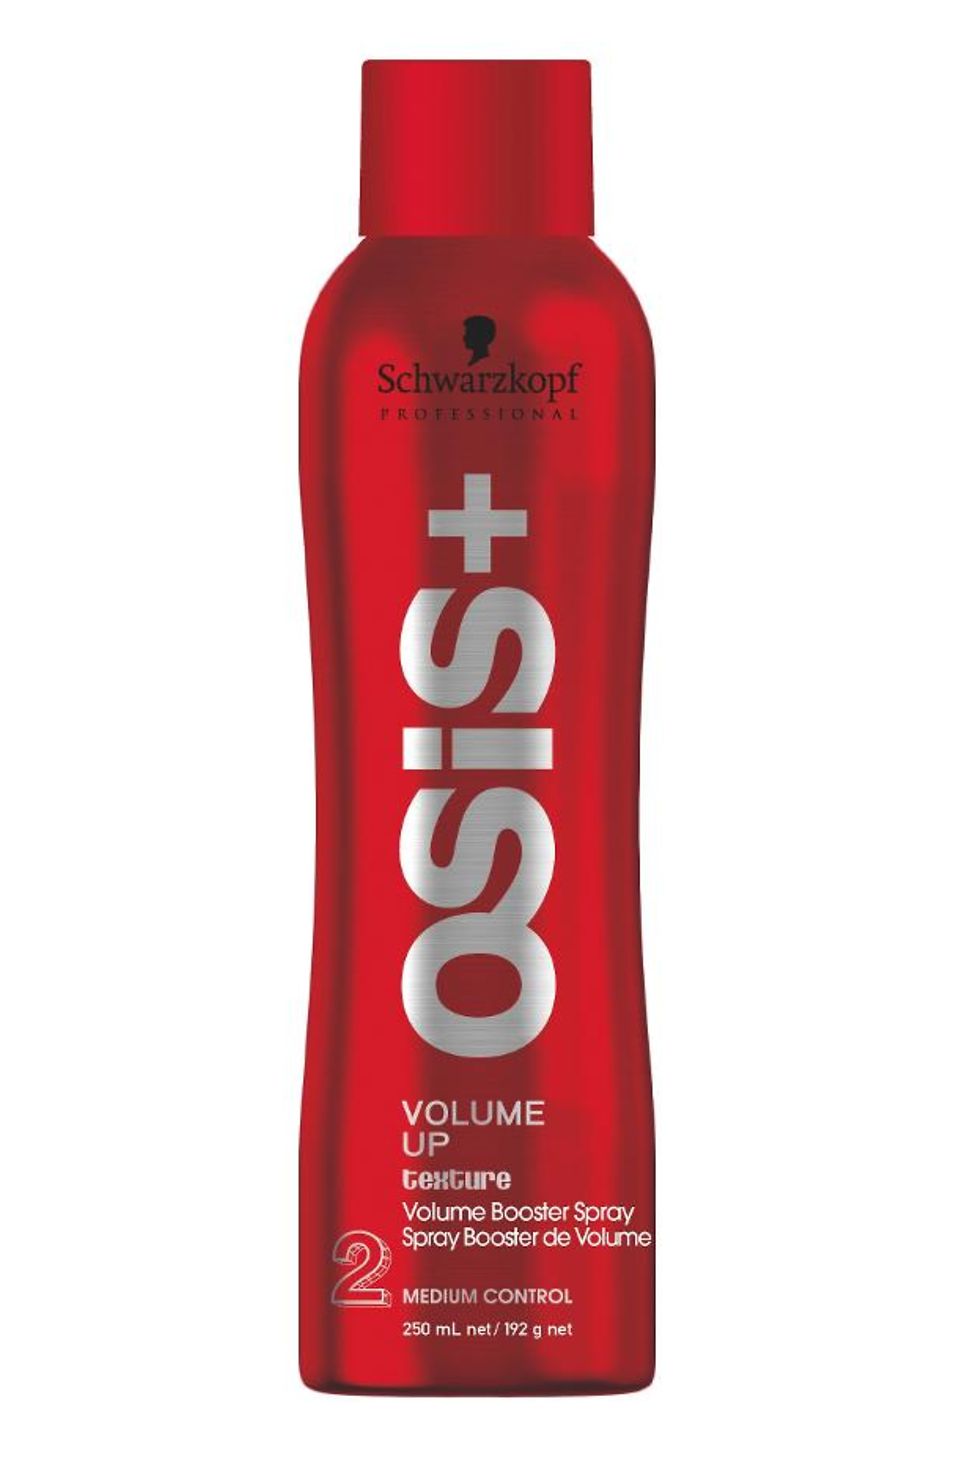 
OSiS+ Volume Up